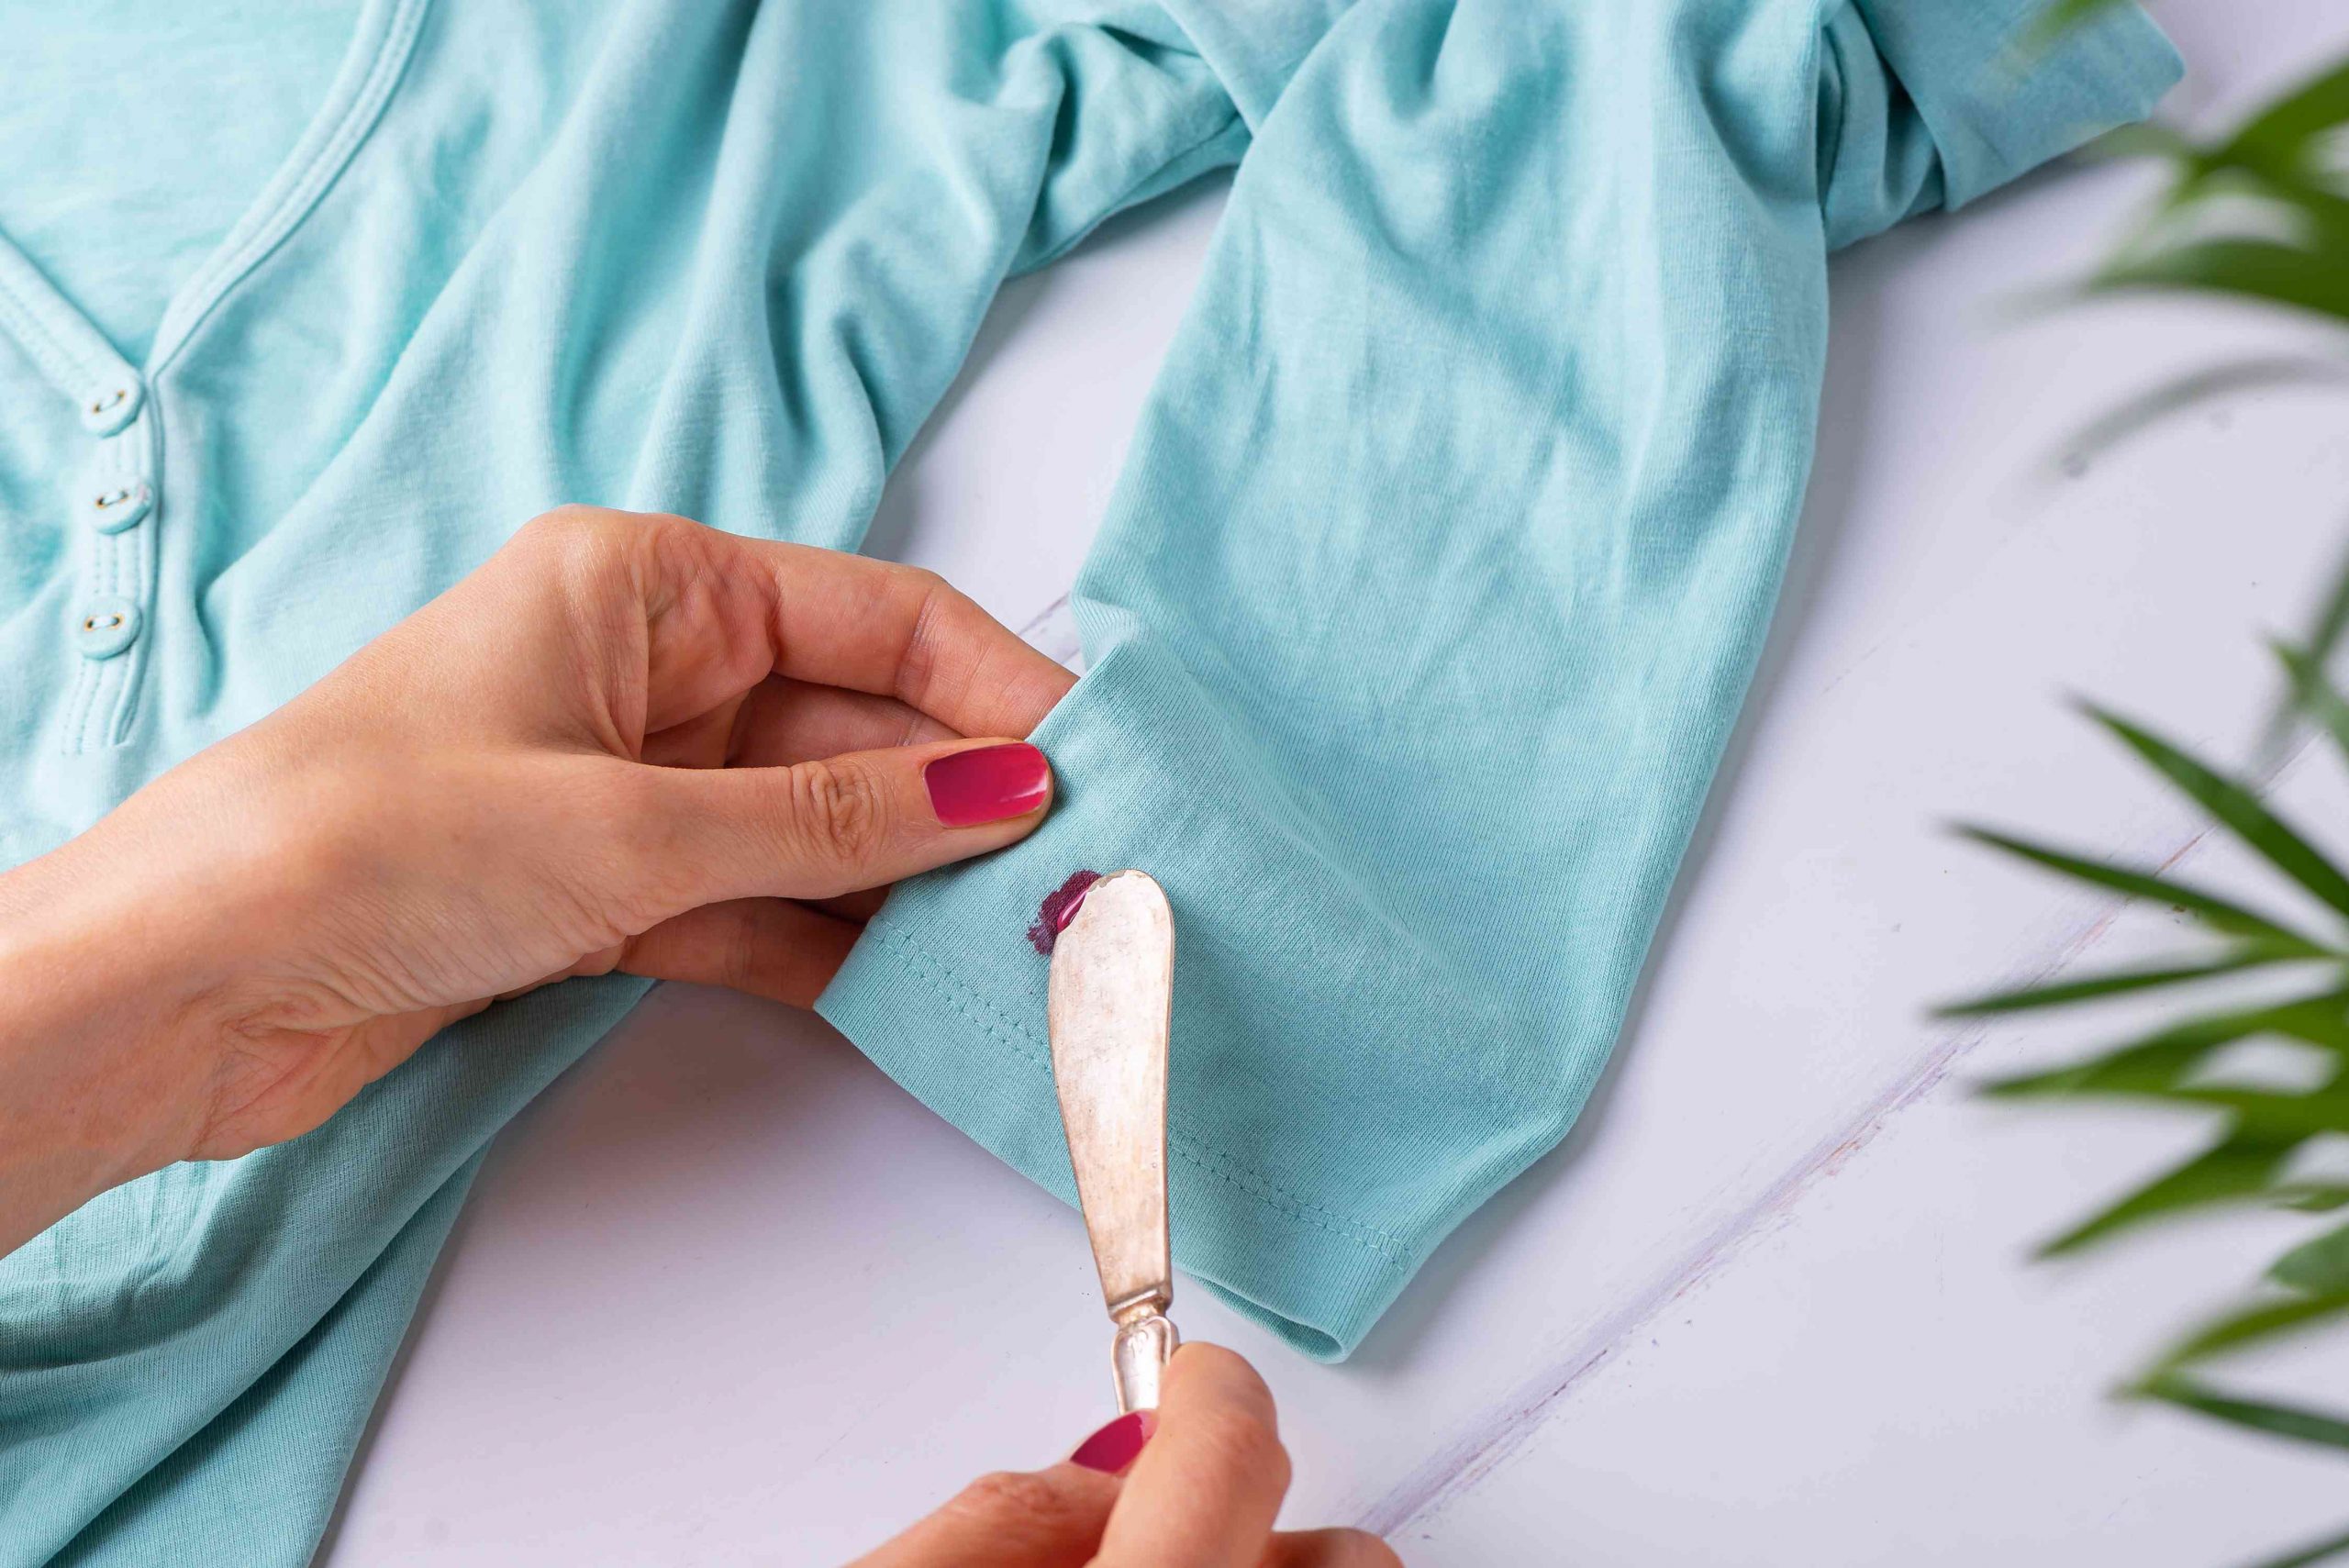 How to Remove Nail Polish Stains From Clothes, Carpet, and Upholstery